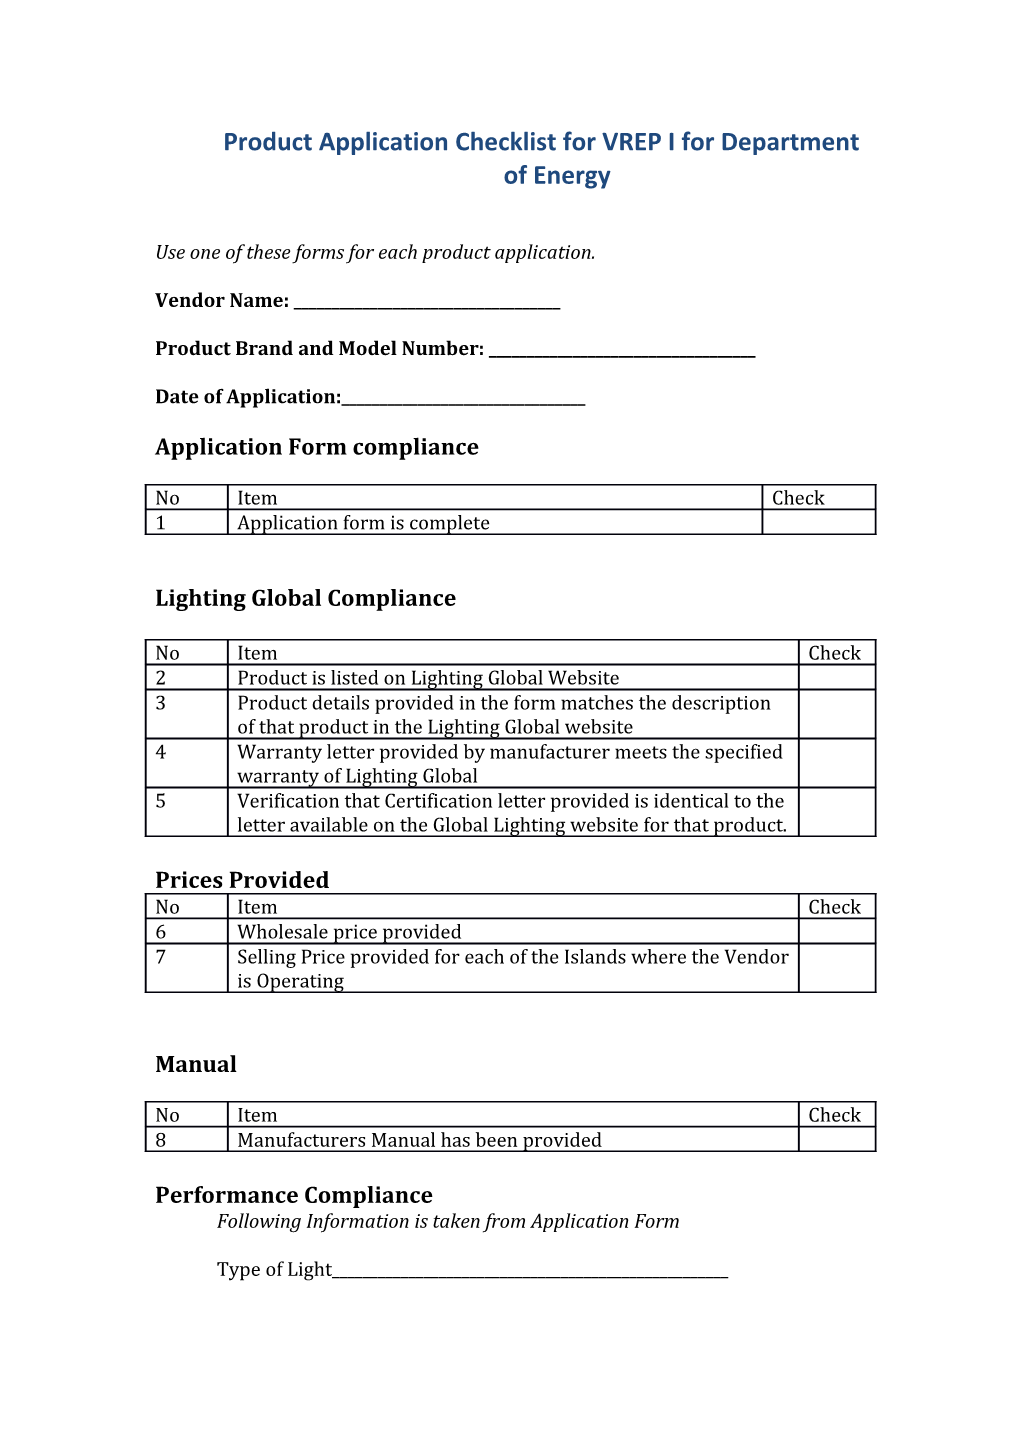 Product Application Checklist for VREP I for Department of Energy